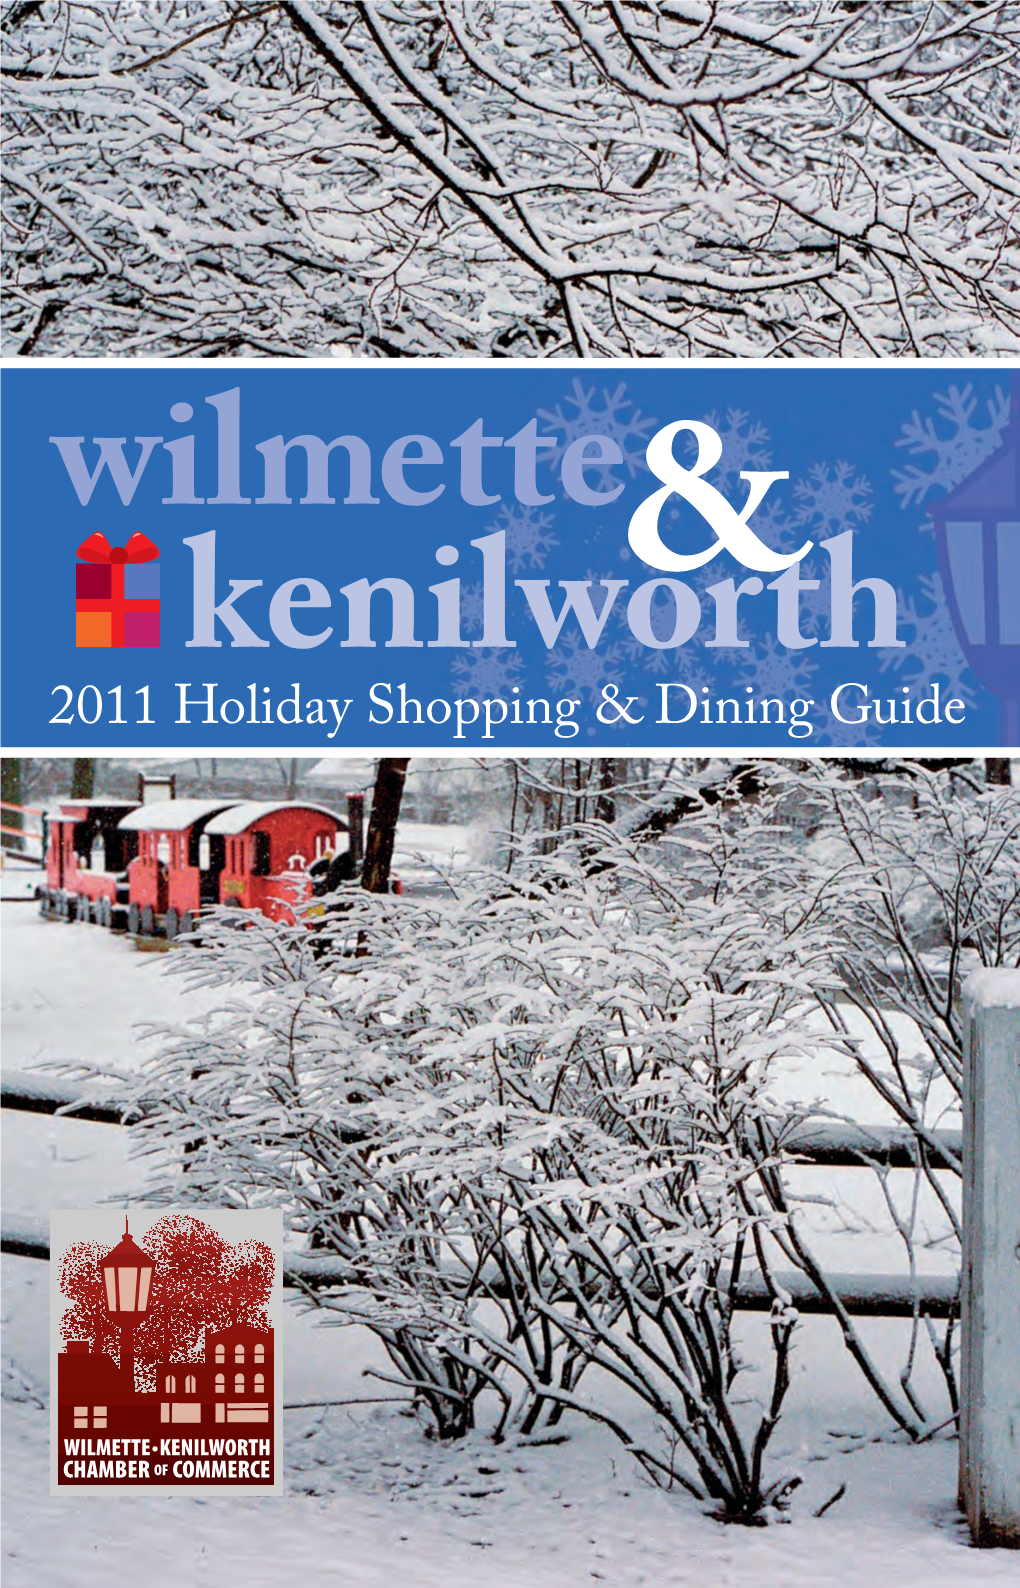 Wilmette Kenilworth& 2011 Holiday Shopping & Dining Guide Wkccovertoc Layout 1 10/14/11 11:22 AM Page 2 ADULTS